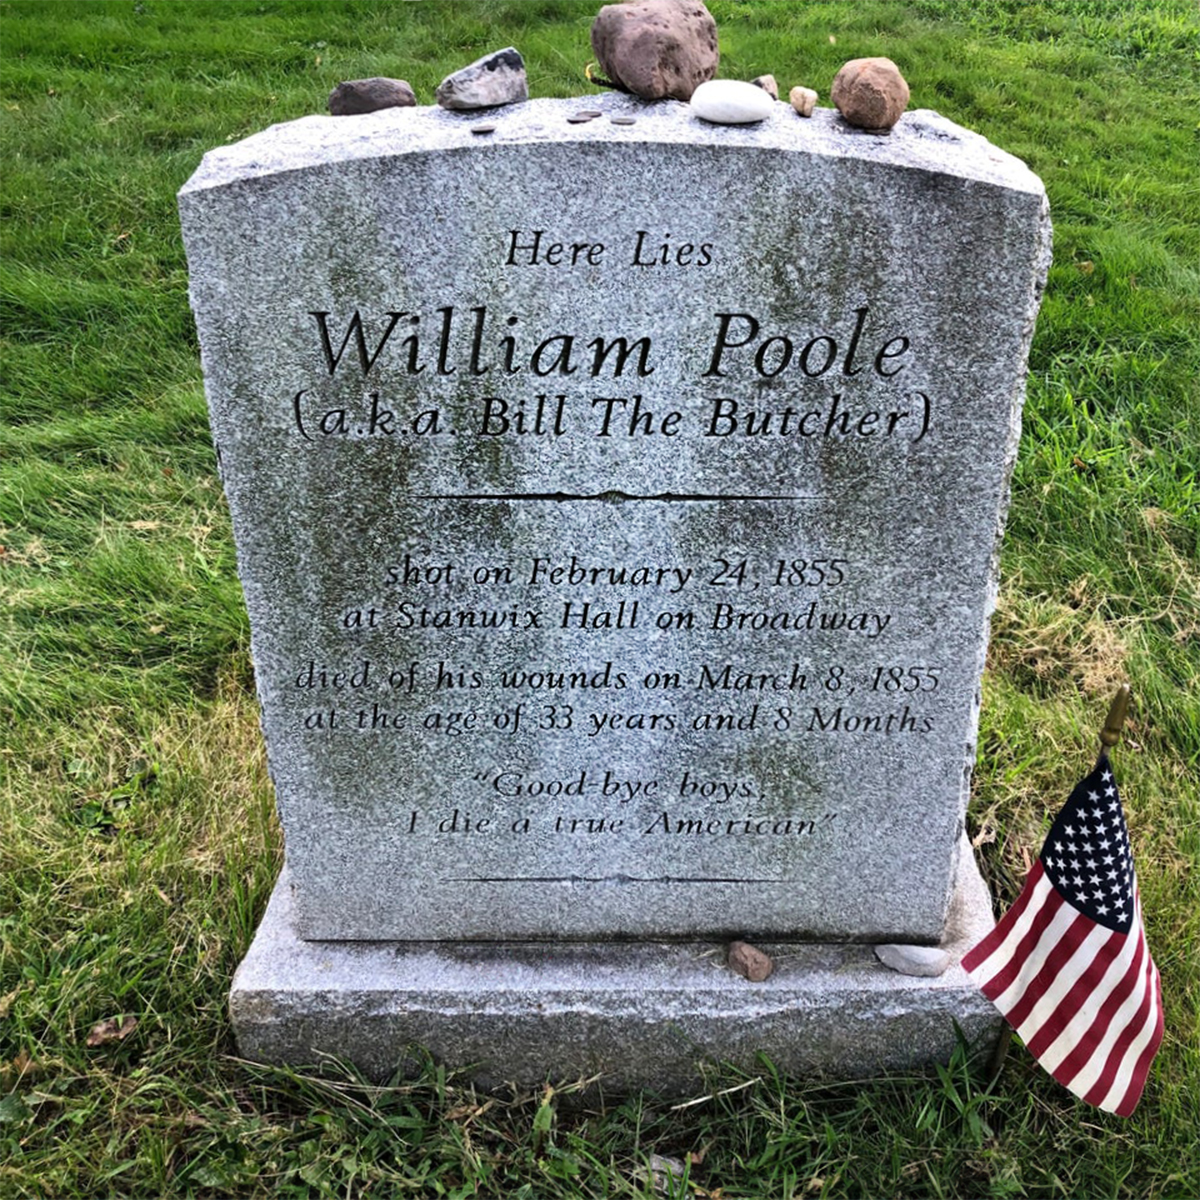 This image shows the gravestone of William Poole, also known as Bill The Butcher. The inscription reads that he was shot on February 24, 1855, at Stanwix Hall on Broadway, and died of his wounds on March 8, 1855, at the age of 33 years and 8 months. The epitaph says "Good bye boys I die a true American." Small stones are placed on top of the gravestone, which is a tradition often associated with respect or remembrance. An American flag is planted in the ground next to the grave.